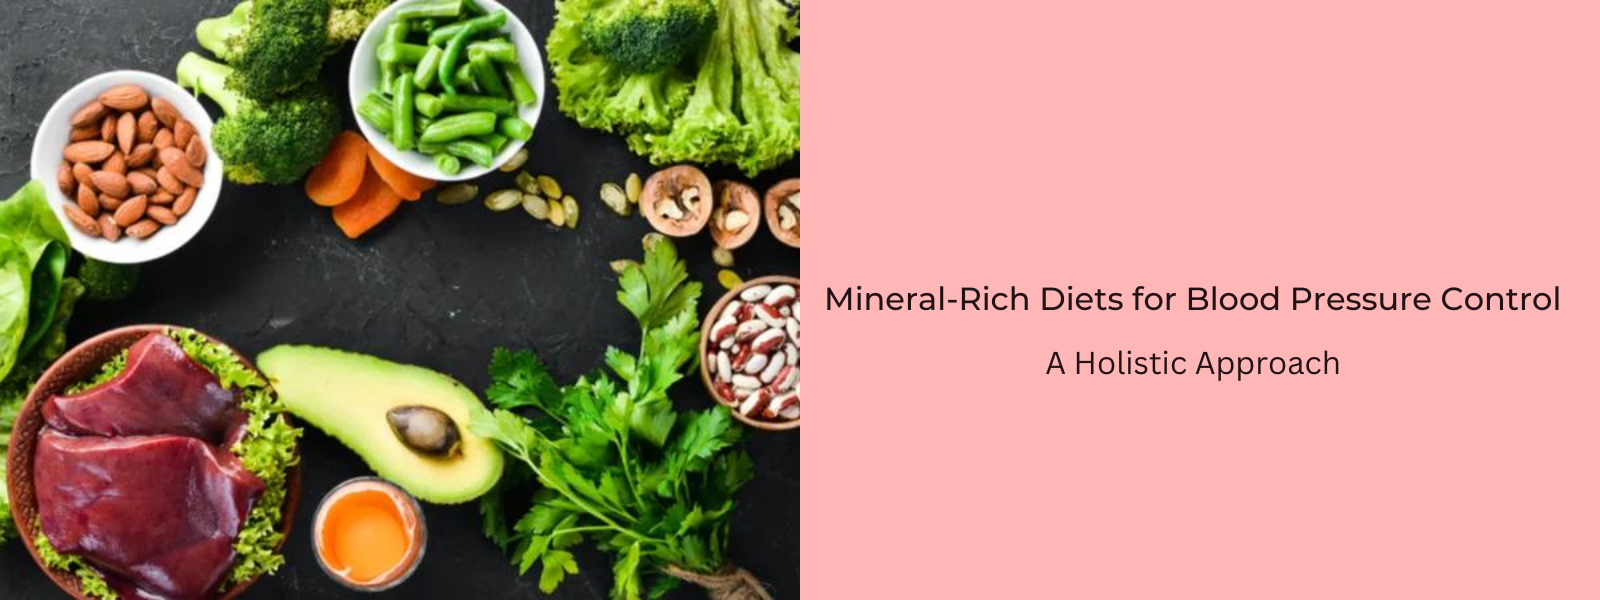 Mineral-Rich Diets for Blood Pressure Control: A Holistic Approach